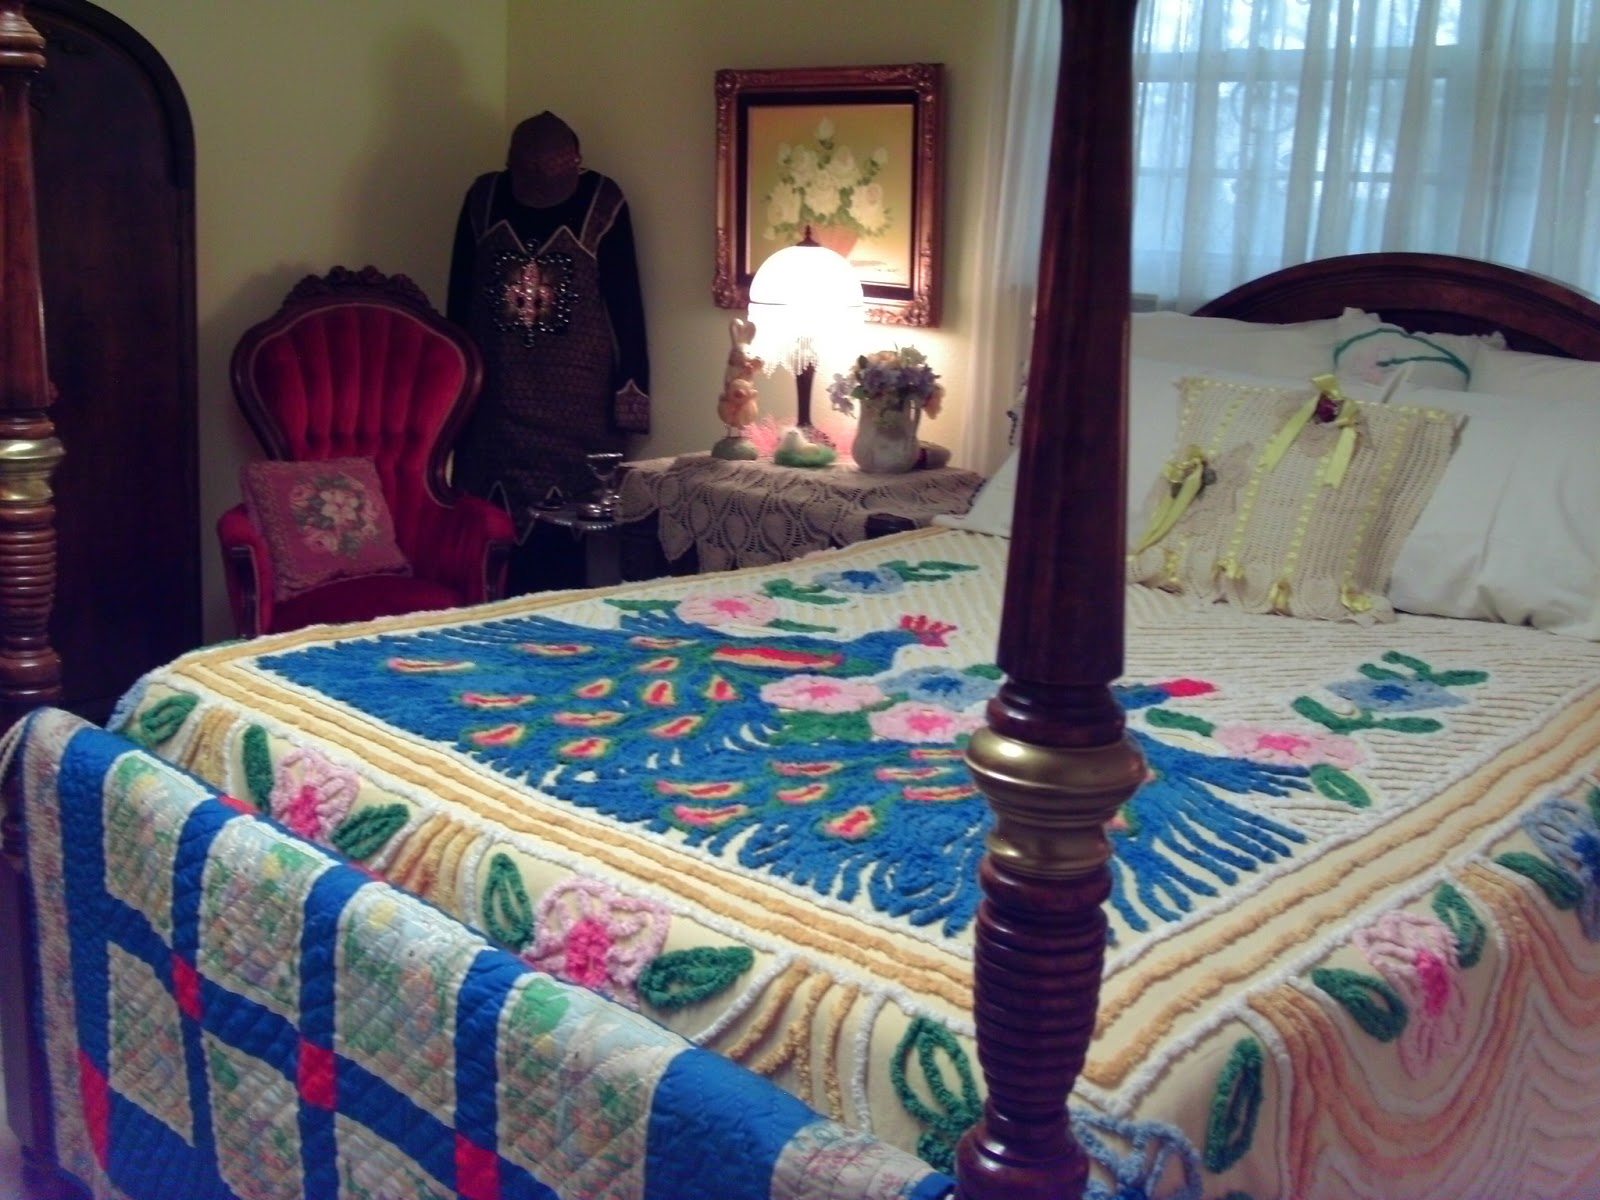 Wow nice peacock chenille 1950's bedspread with by designer2, $229.00